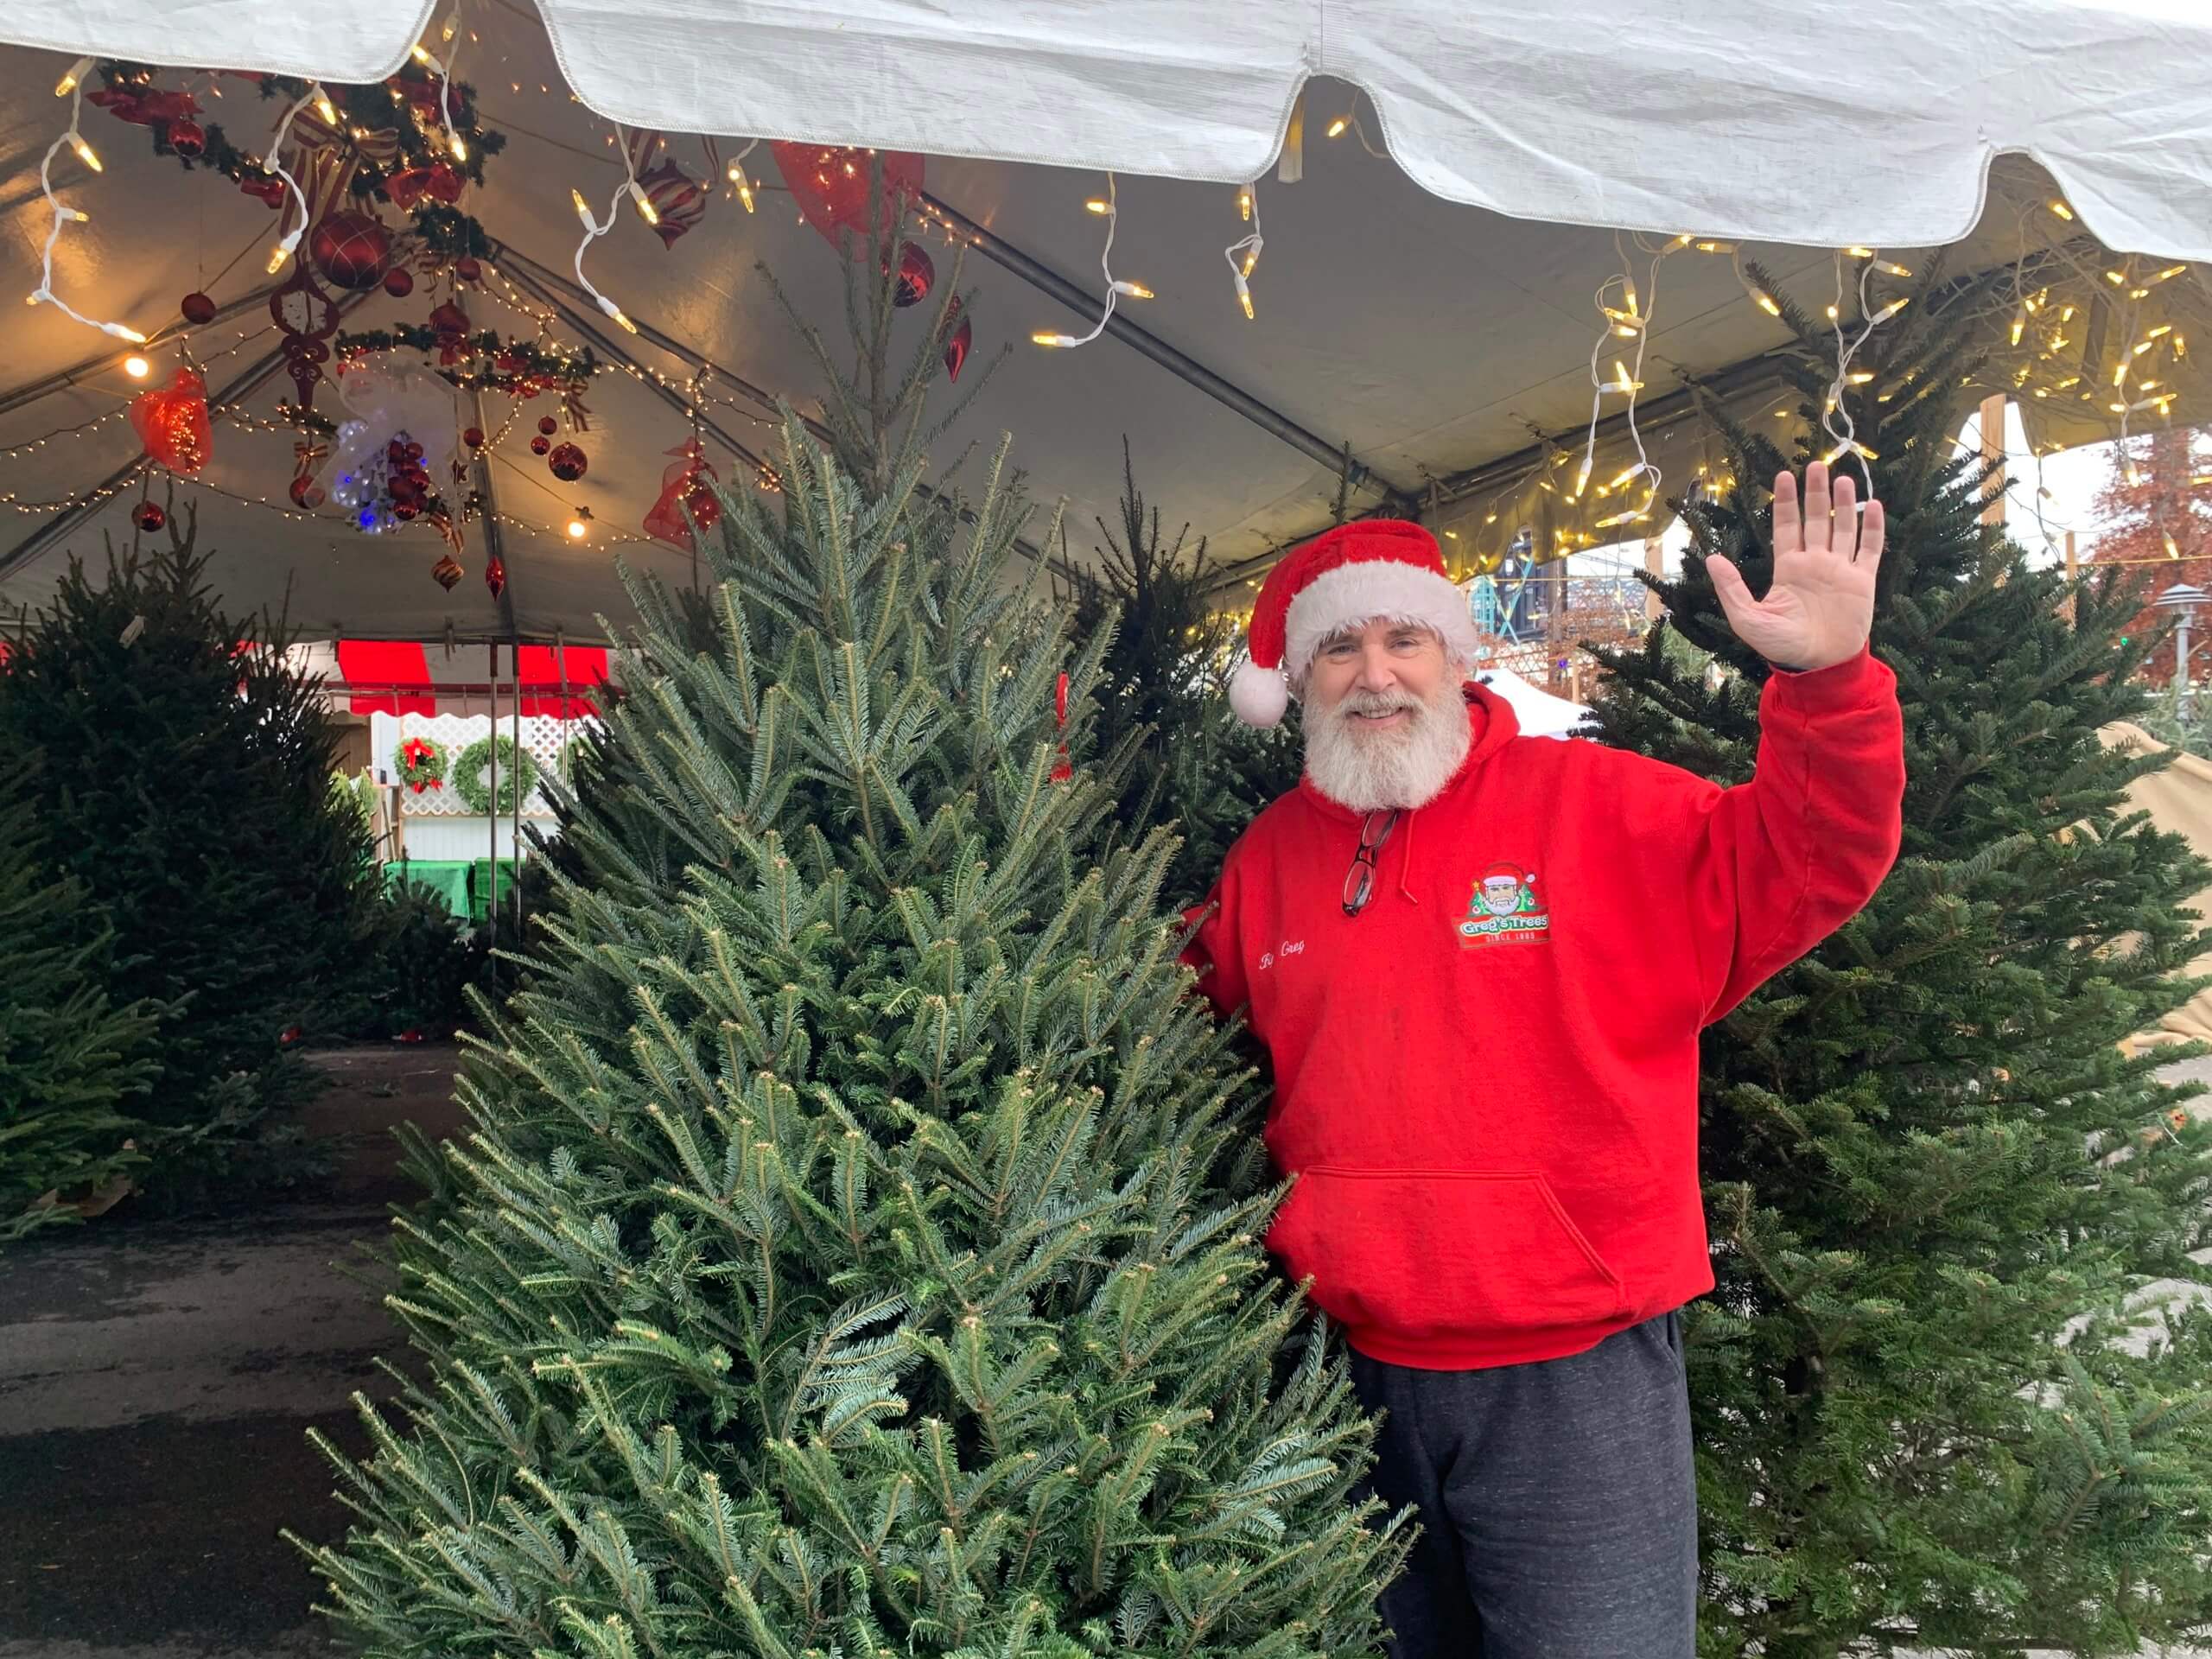 This Queens native runs some of the largest Christmas tree stands in New York City